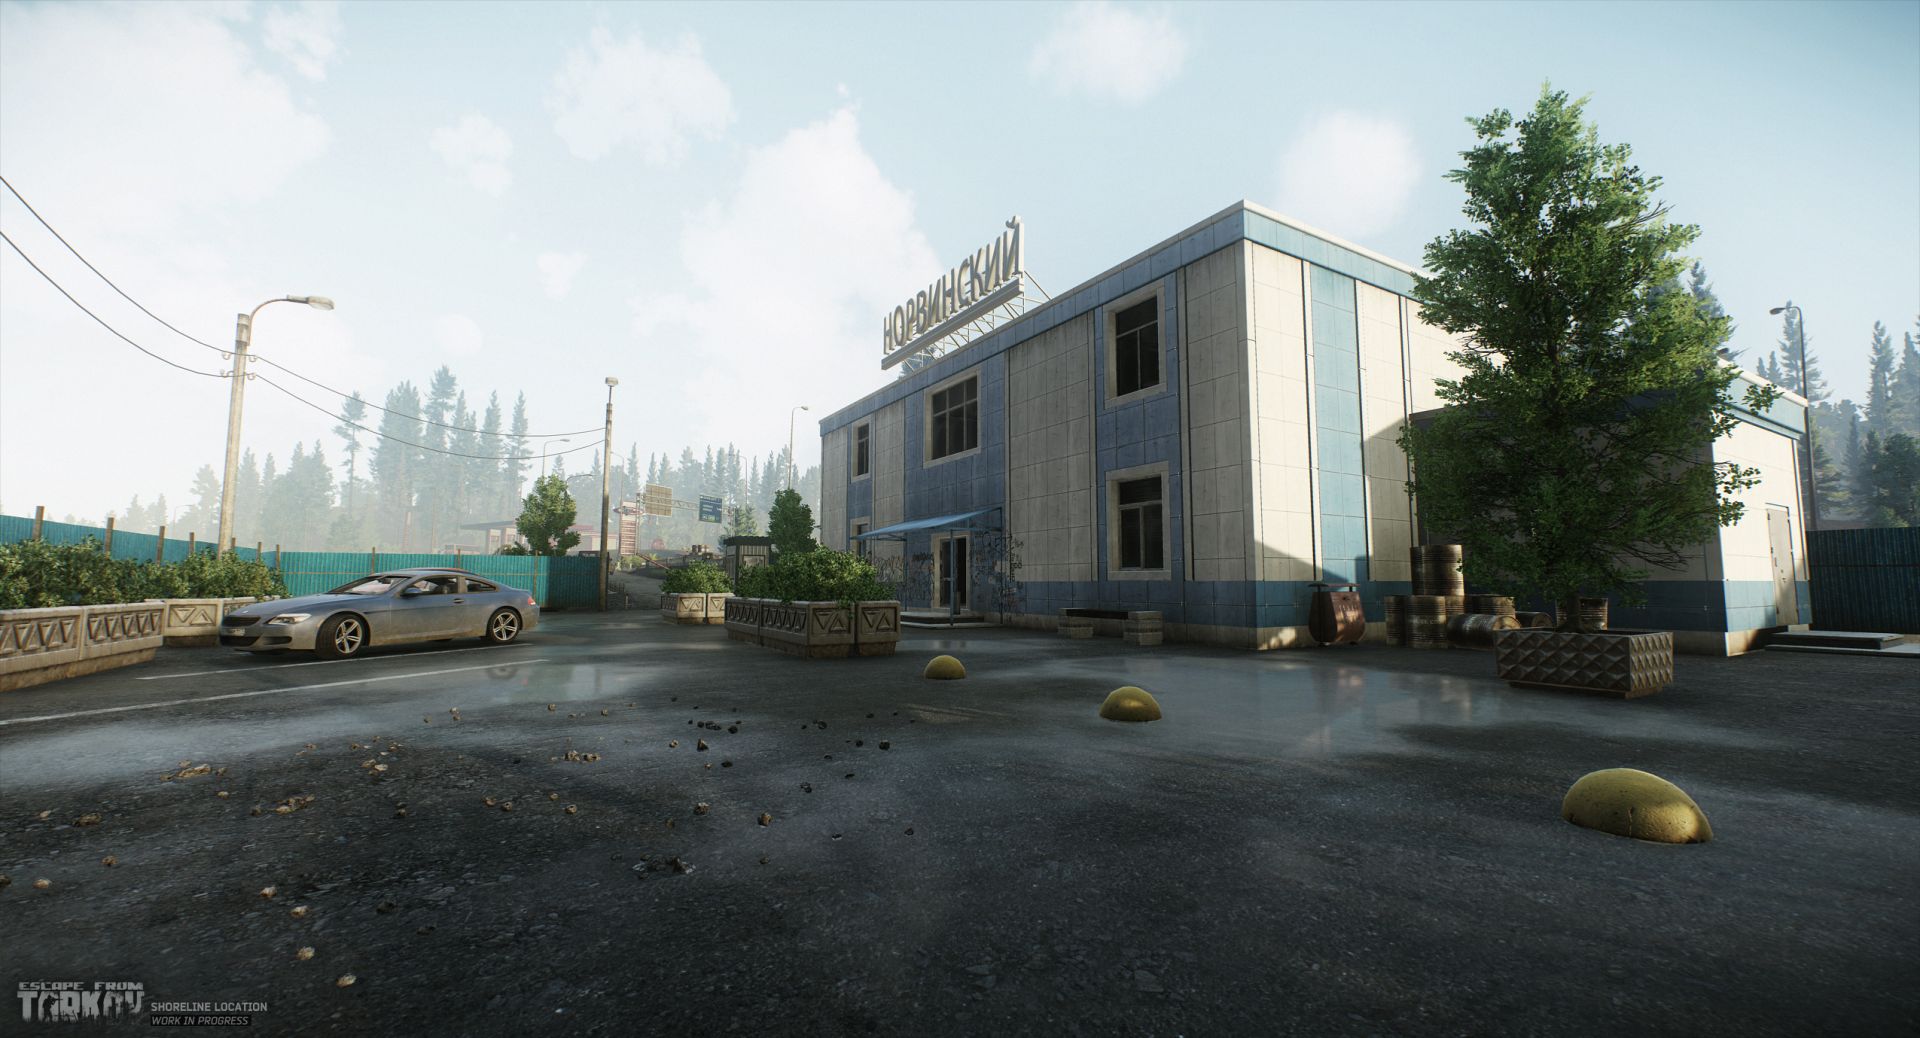 Escape From Tarkov Video Games War Game Tactical Game Mmorpg First Person Shooter 1920x1038